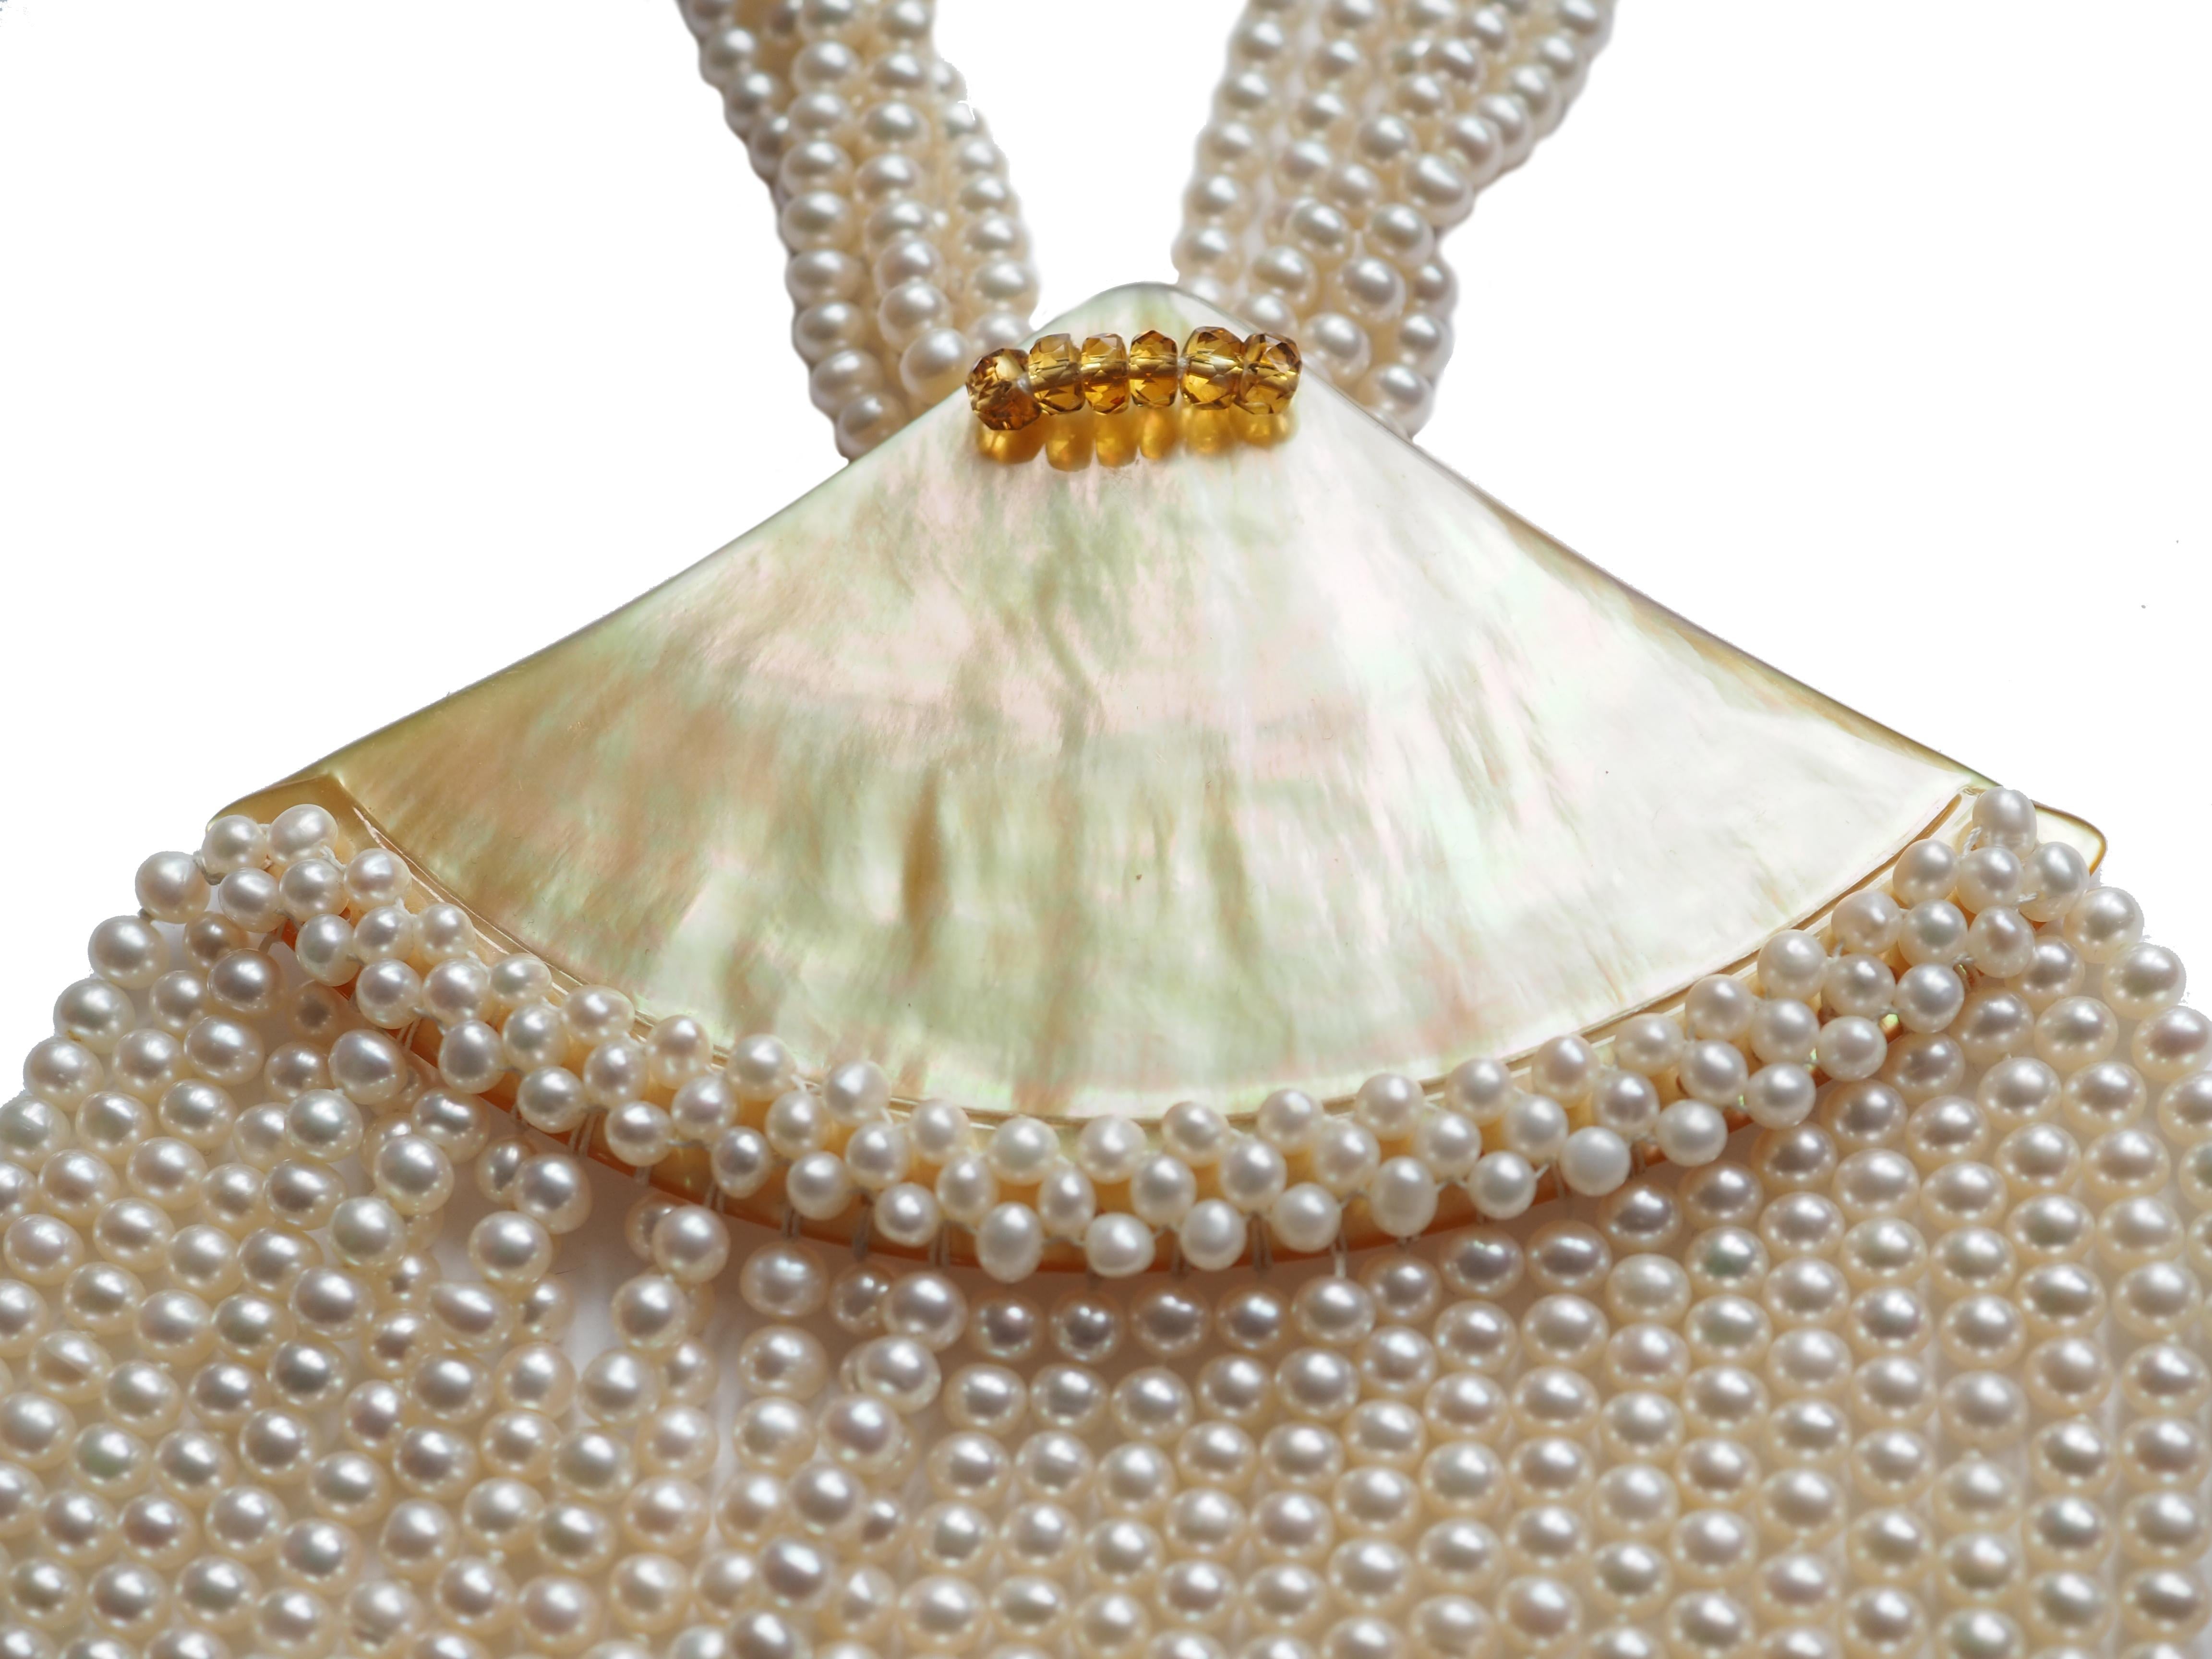 Natural  white Pearls  multi thread Necklace Mother of Pearls element  Citrine bronze.
All Giulia Colussi jewelry is new and has never been previously owned or worn. Each item will arrive at your door beautifully gift wrapped in our boxes, put